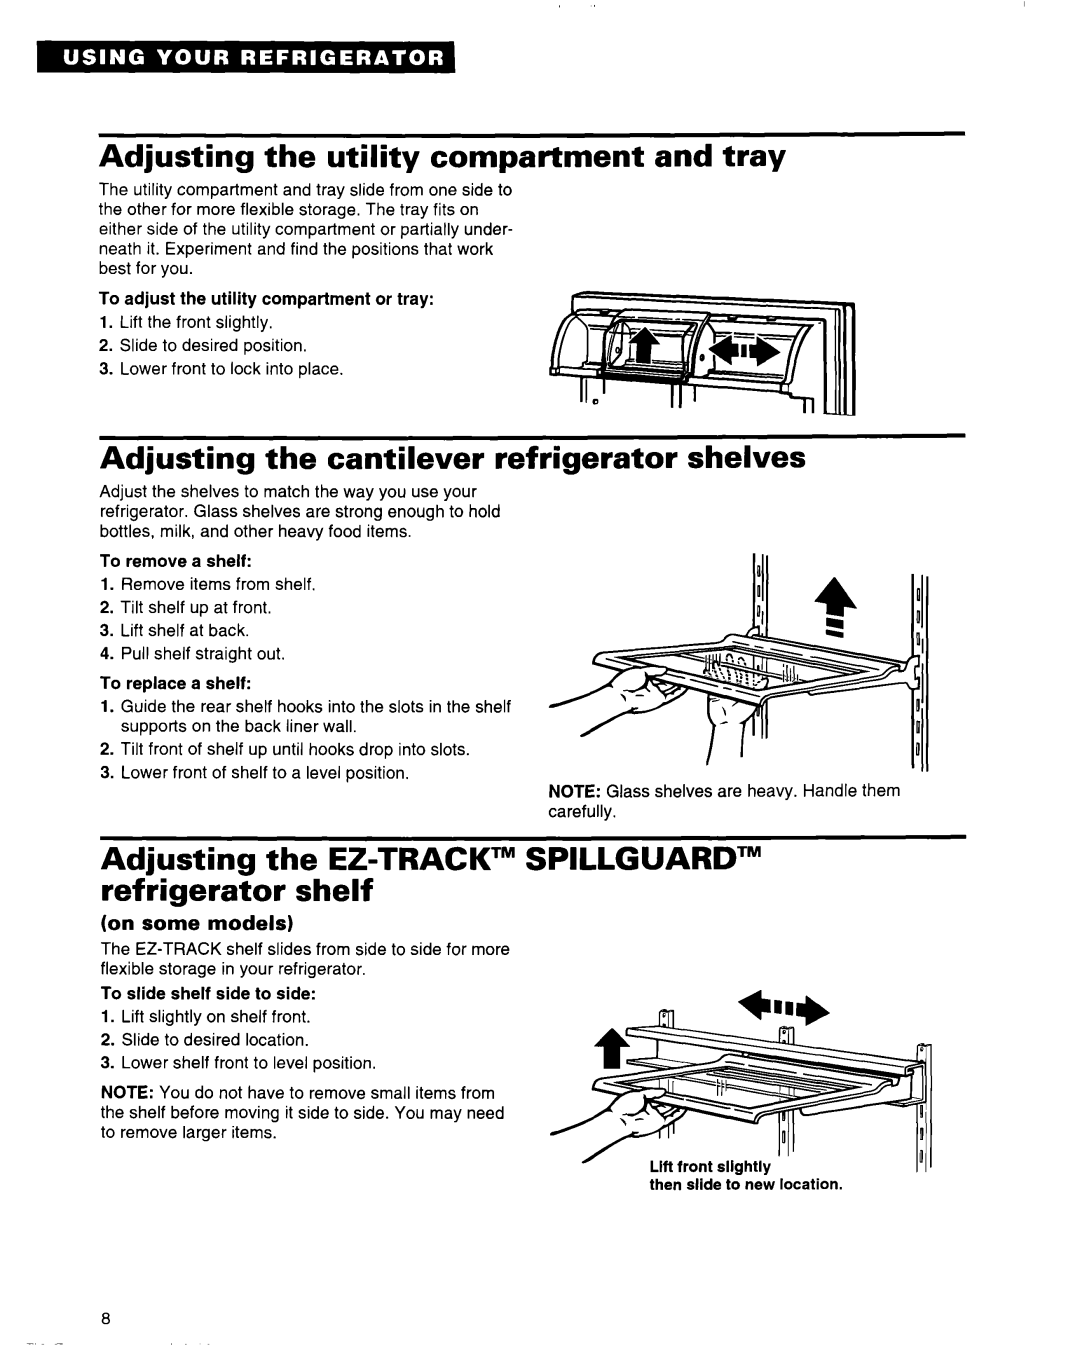 Whirlpool 2184589 warranty Adjusting the utility compartment and tray, Adjusting the cantilever refrigerator shelves 